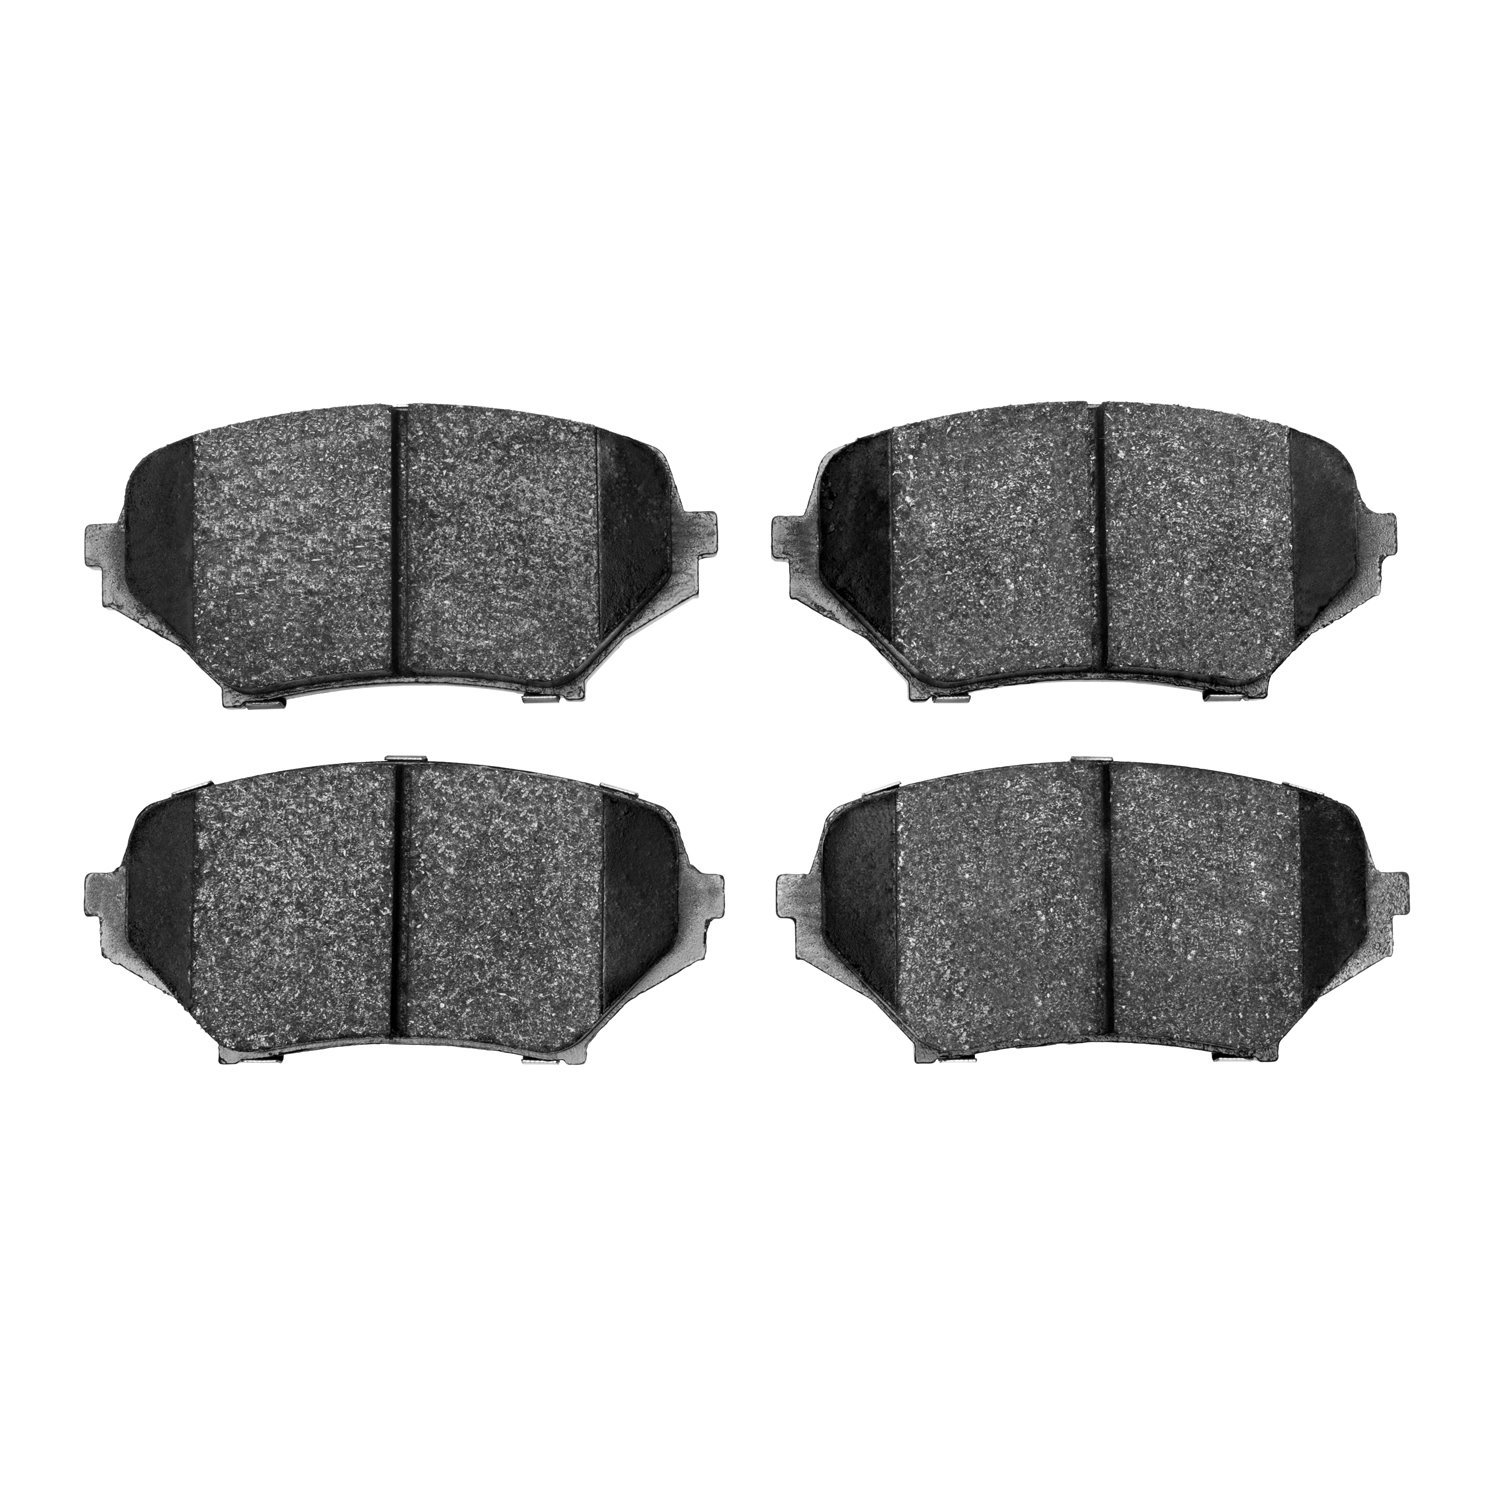 1000-1179-00 Track/Street Low-Metallic Brake Pads Kit, 2006-2015 Ford/Lincoln/Mercury/Mazda, Position: Front